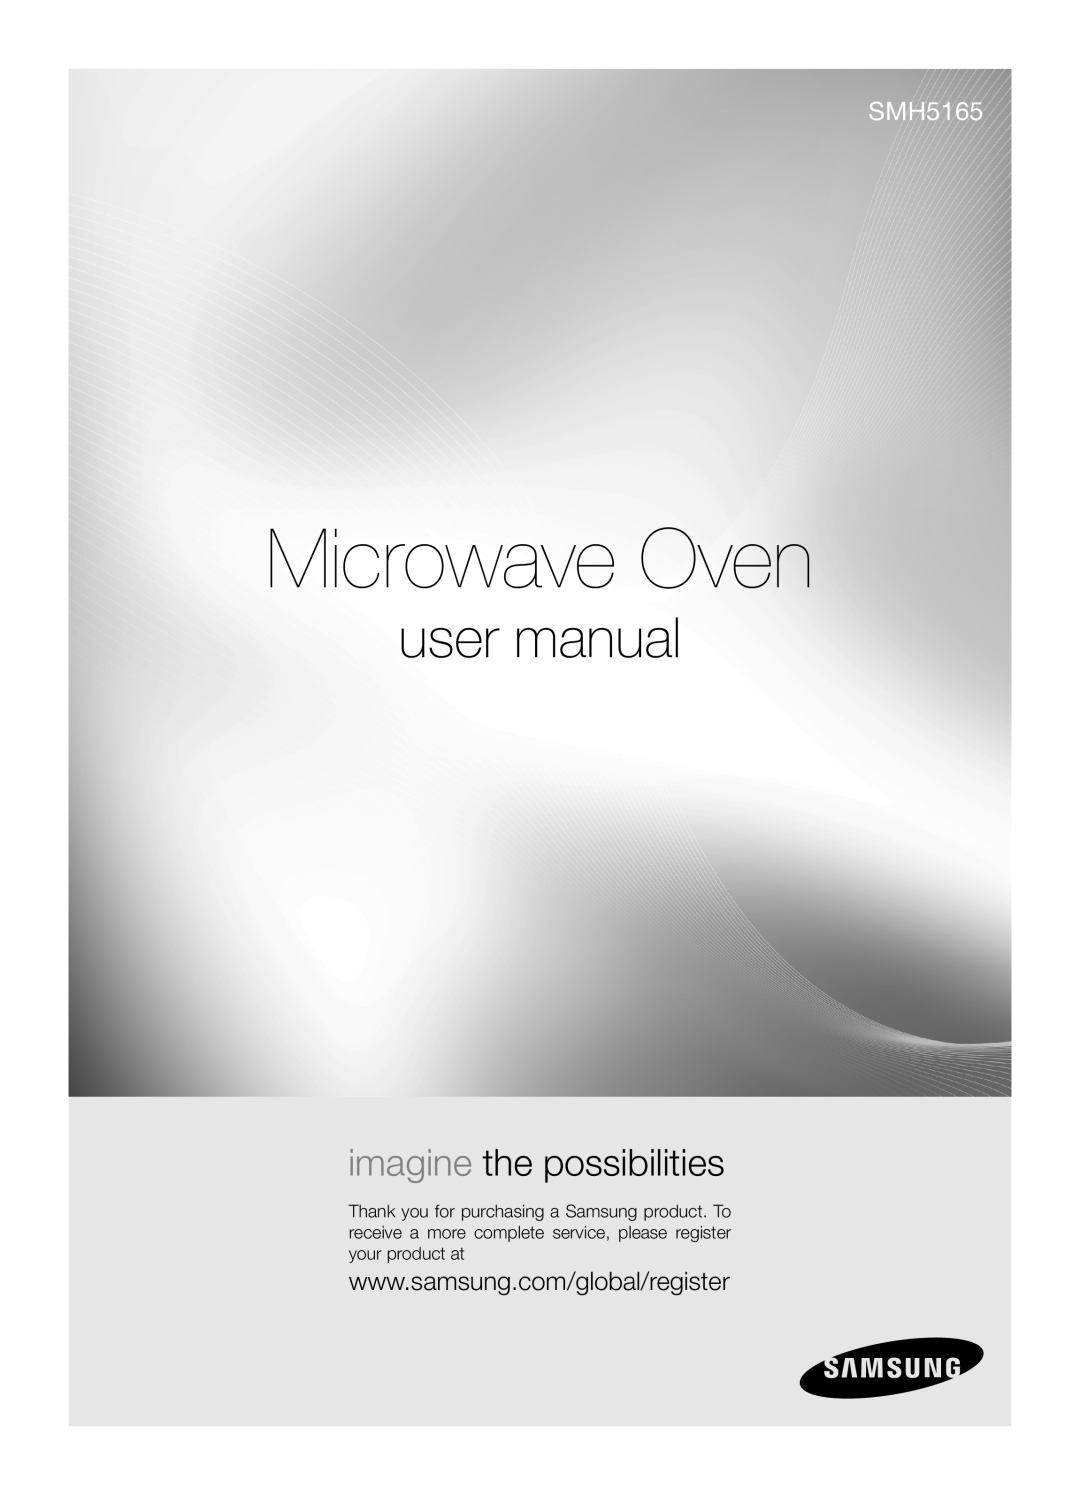 Samsung SMH5165 user manual Microwave Oven, imagine the possibilities 